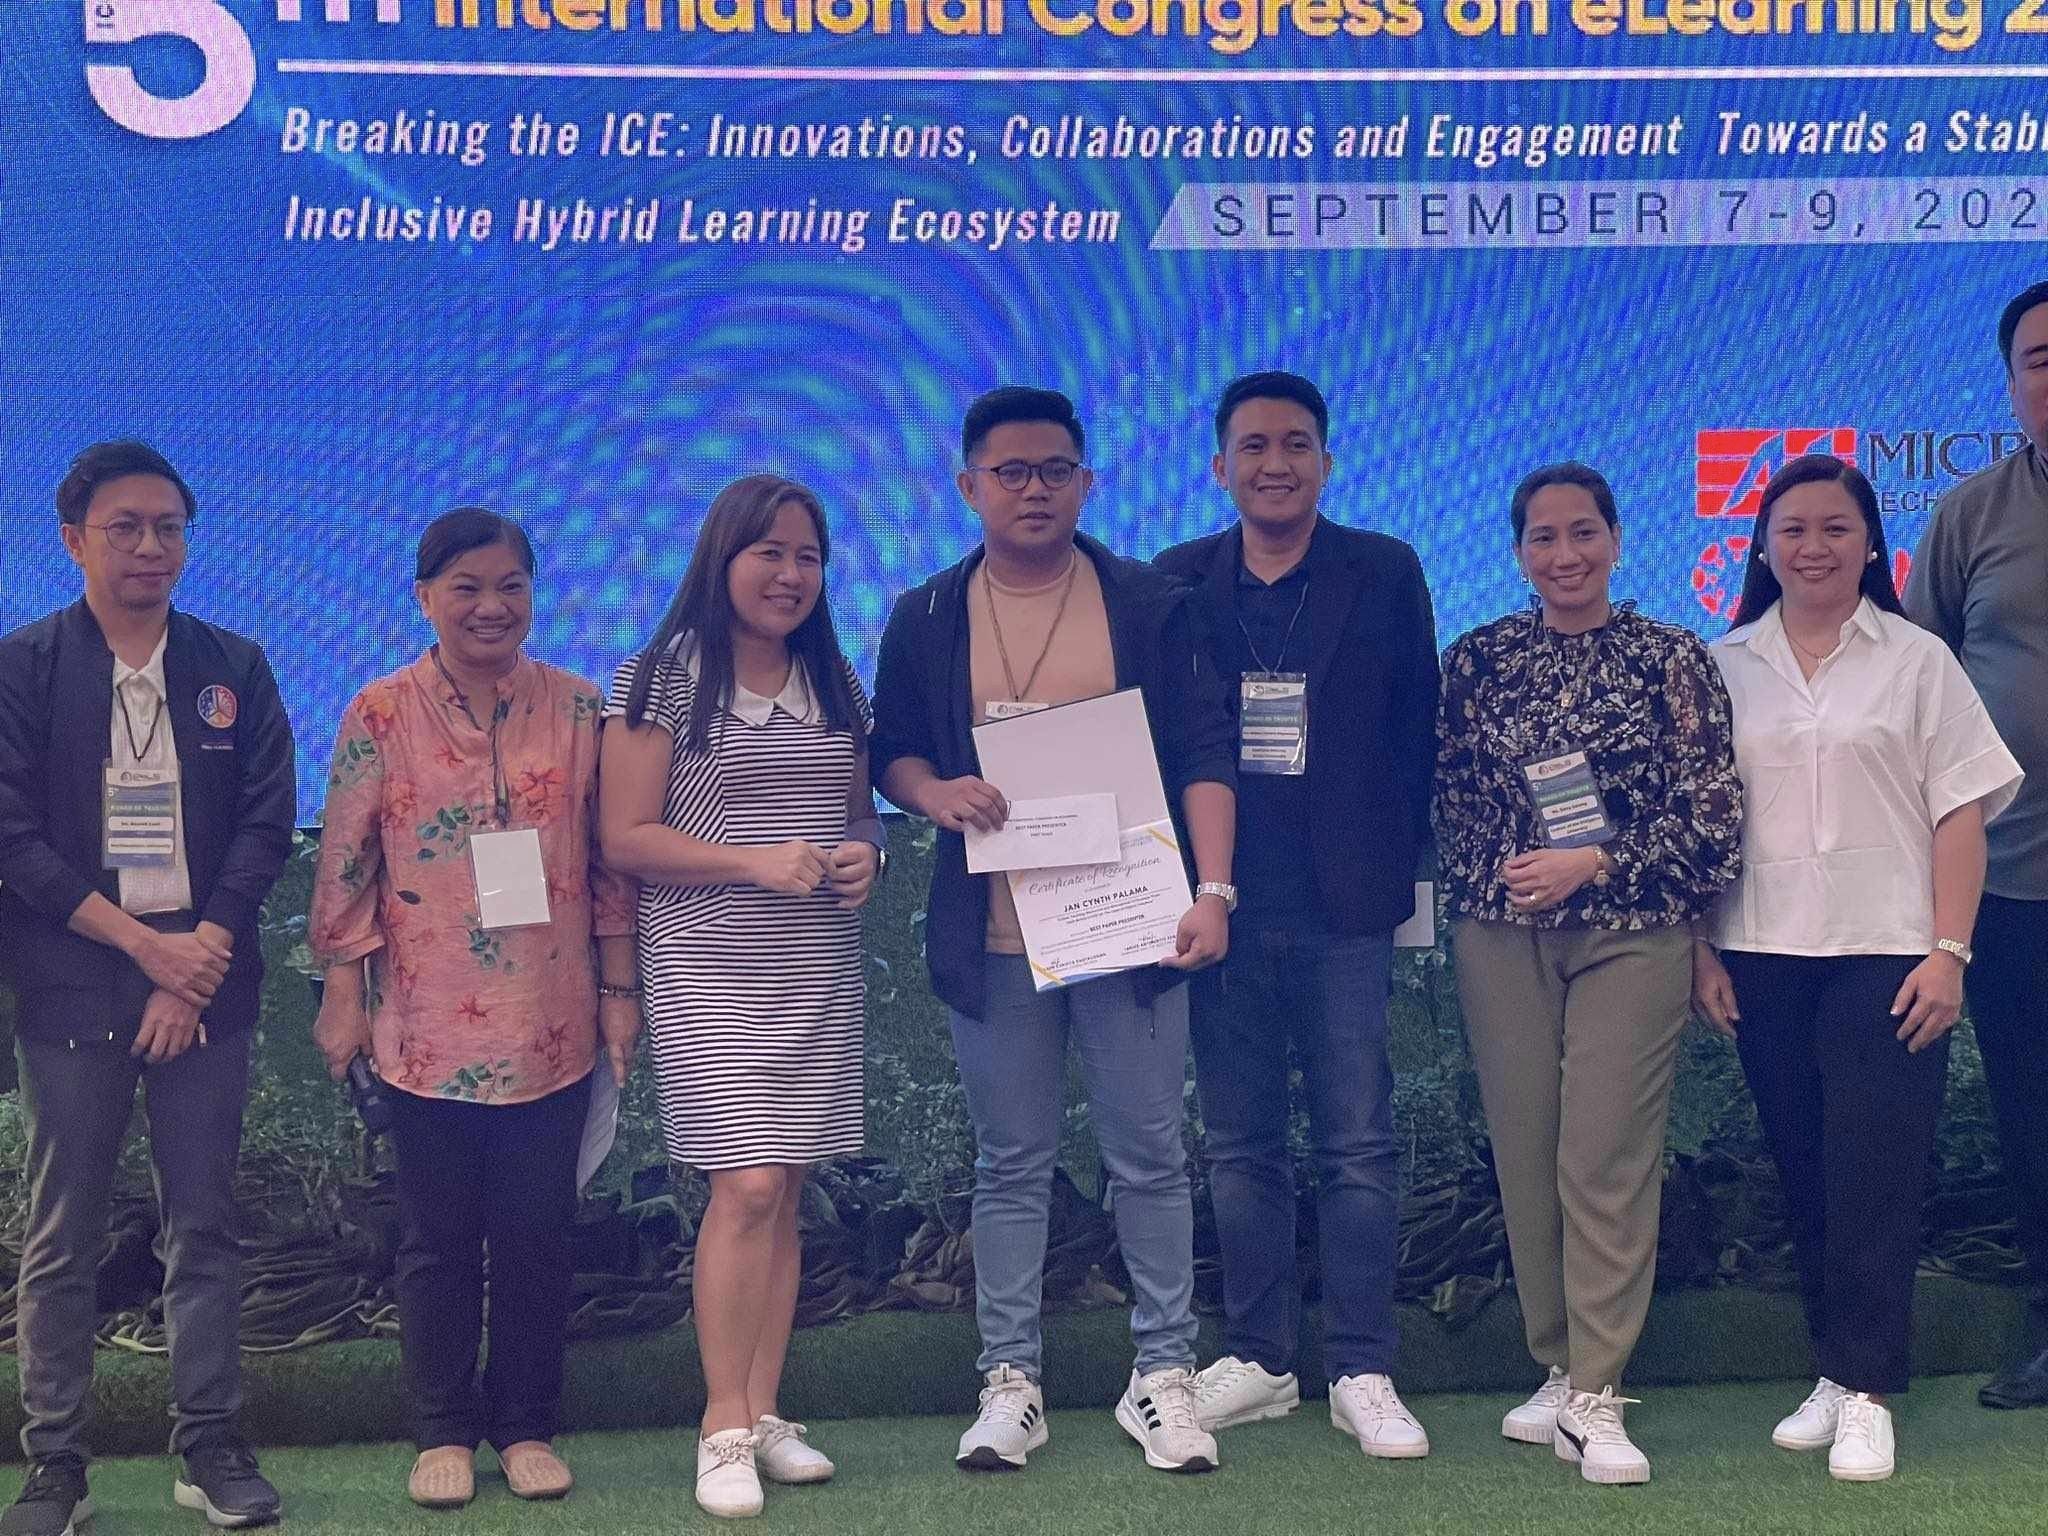 SHS faculty member bags 1st place in research presentation at int’l eLearning congress